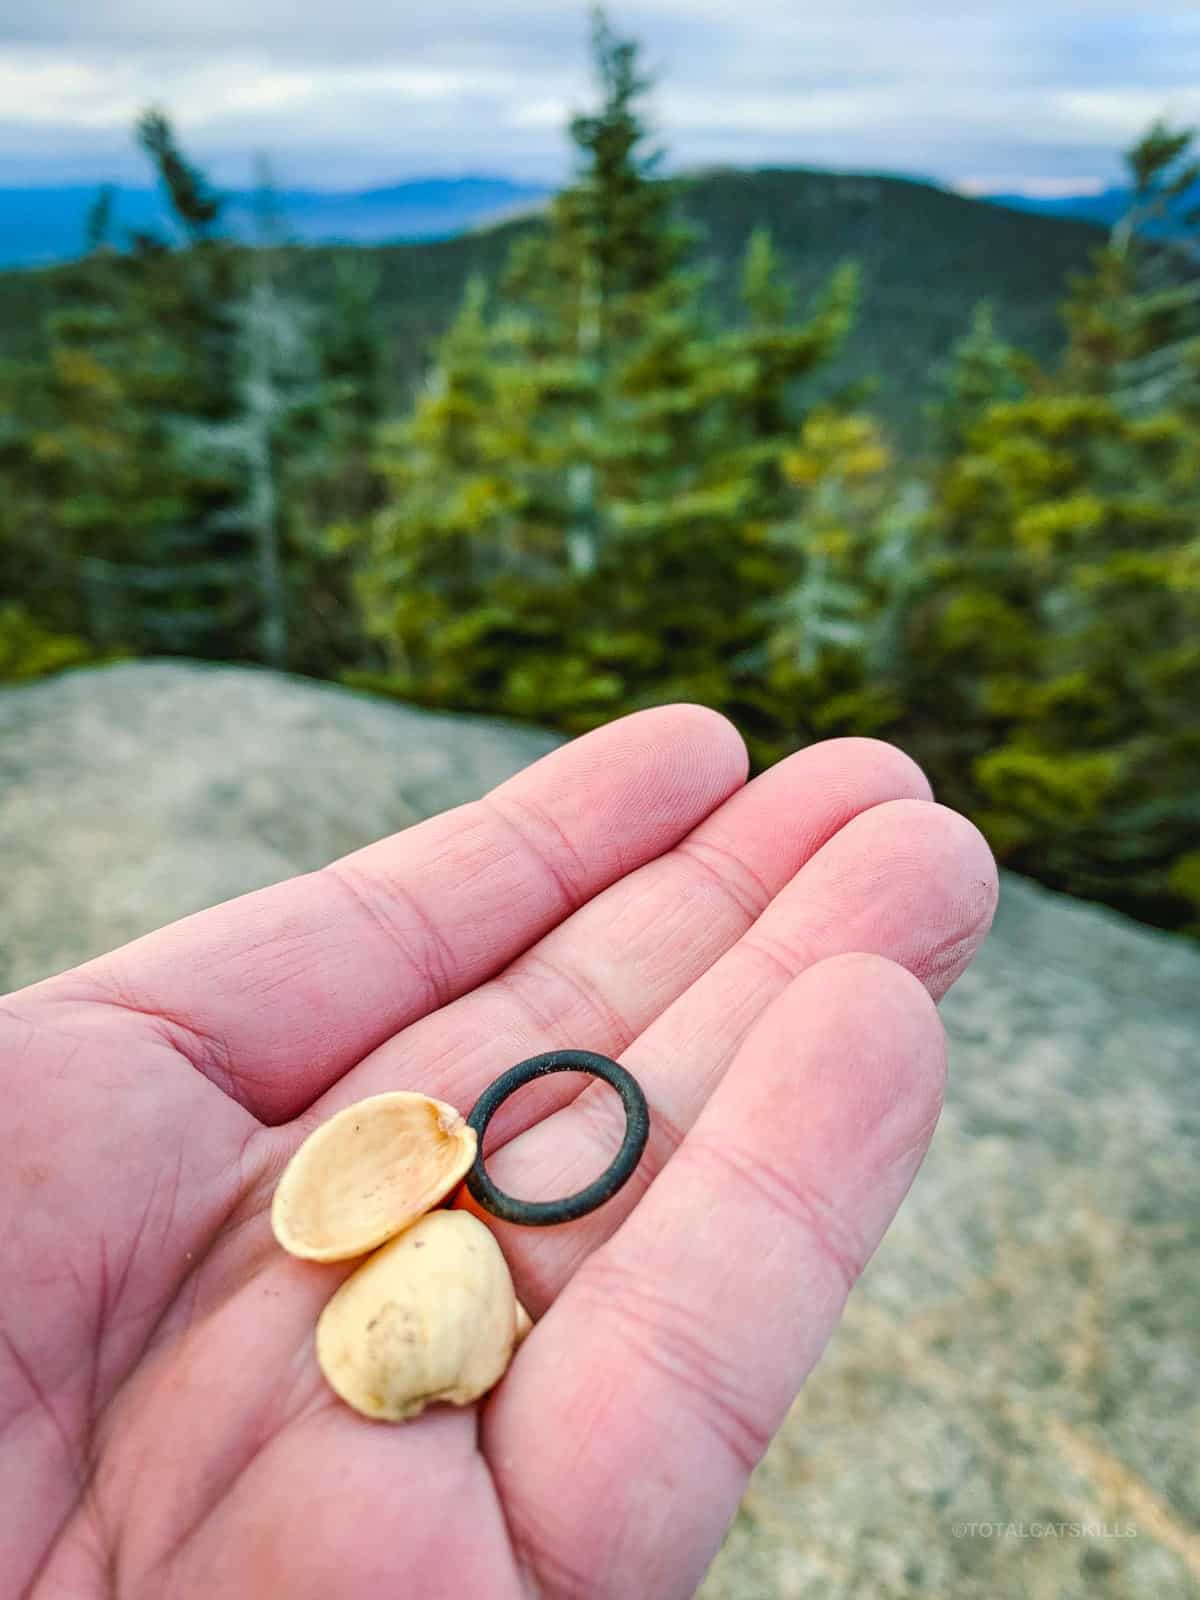 hand holding two pistachio shells and a small black plastic ring